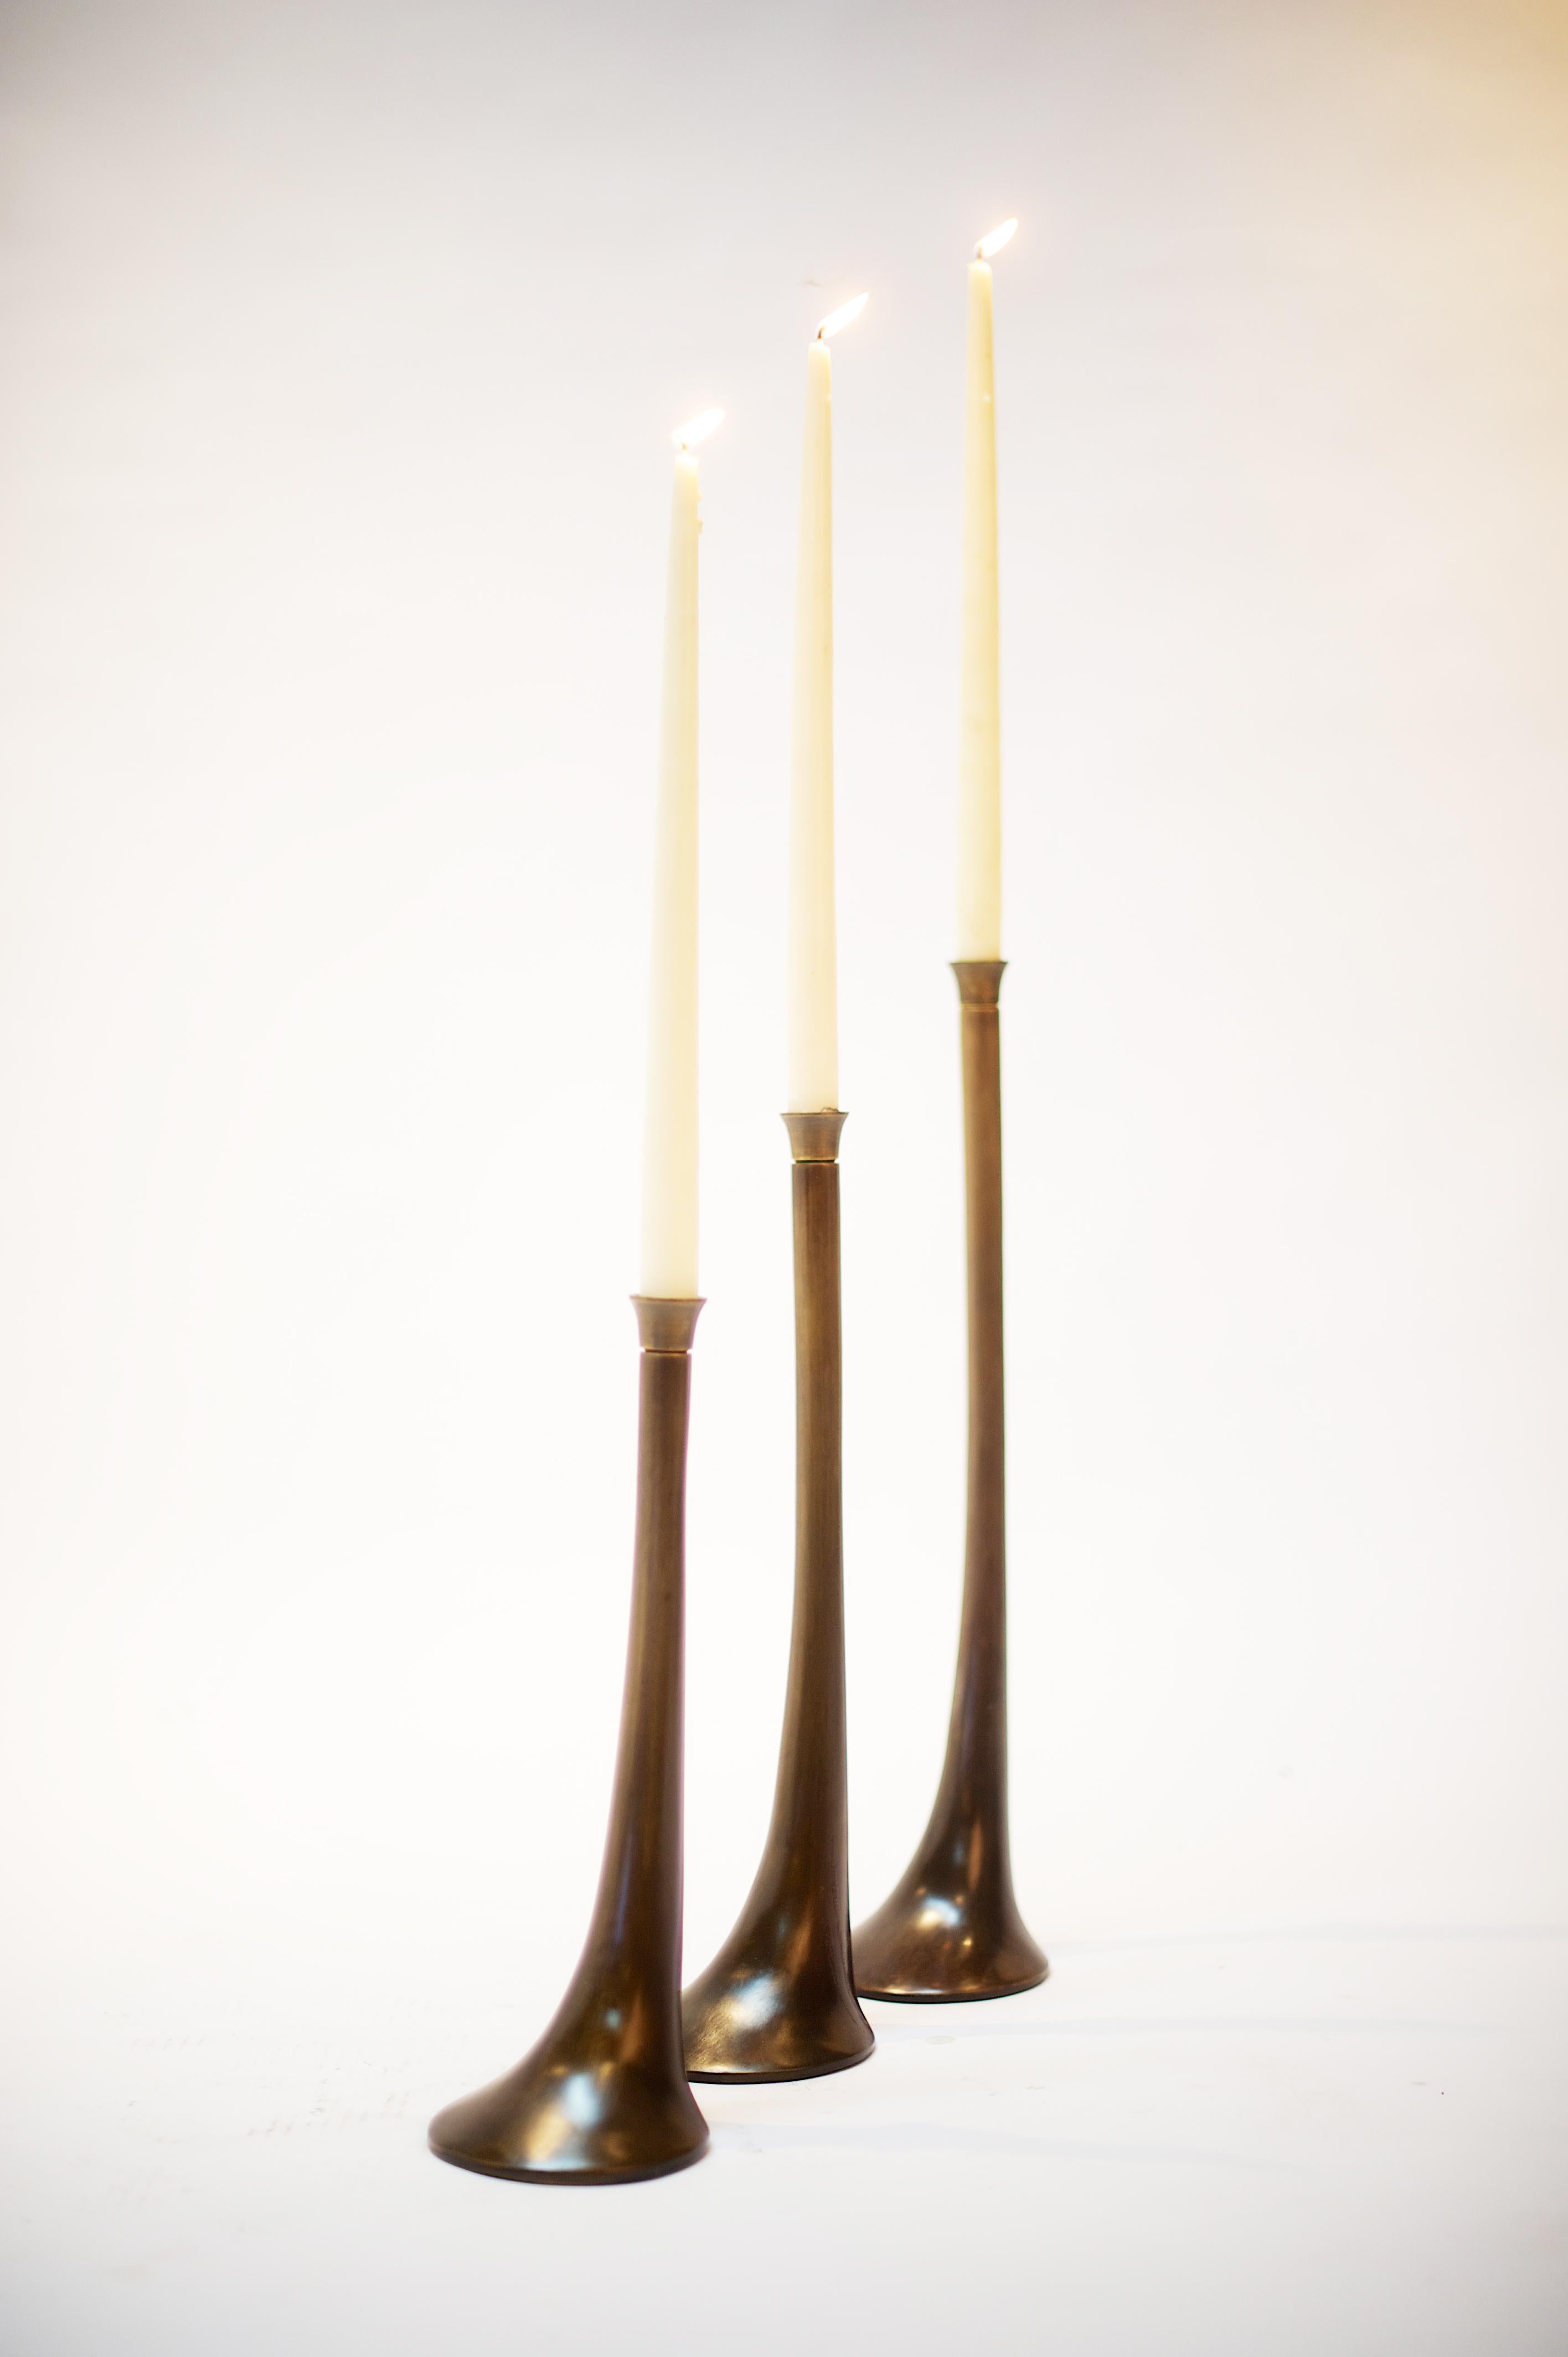 Large Elm Bronze Candlestick by Elan Atelier

The Elm Candleholders are cast using the lost wax method in an elegant sculptural shape. Shown in our antique bronze finish, with highlights (ombre). Comes in 3 sizes.

Dimensions/
Small/
dia 4.5 x h